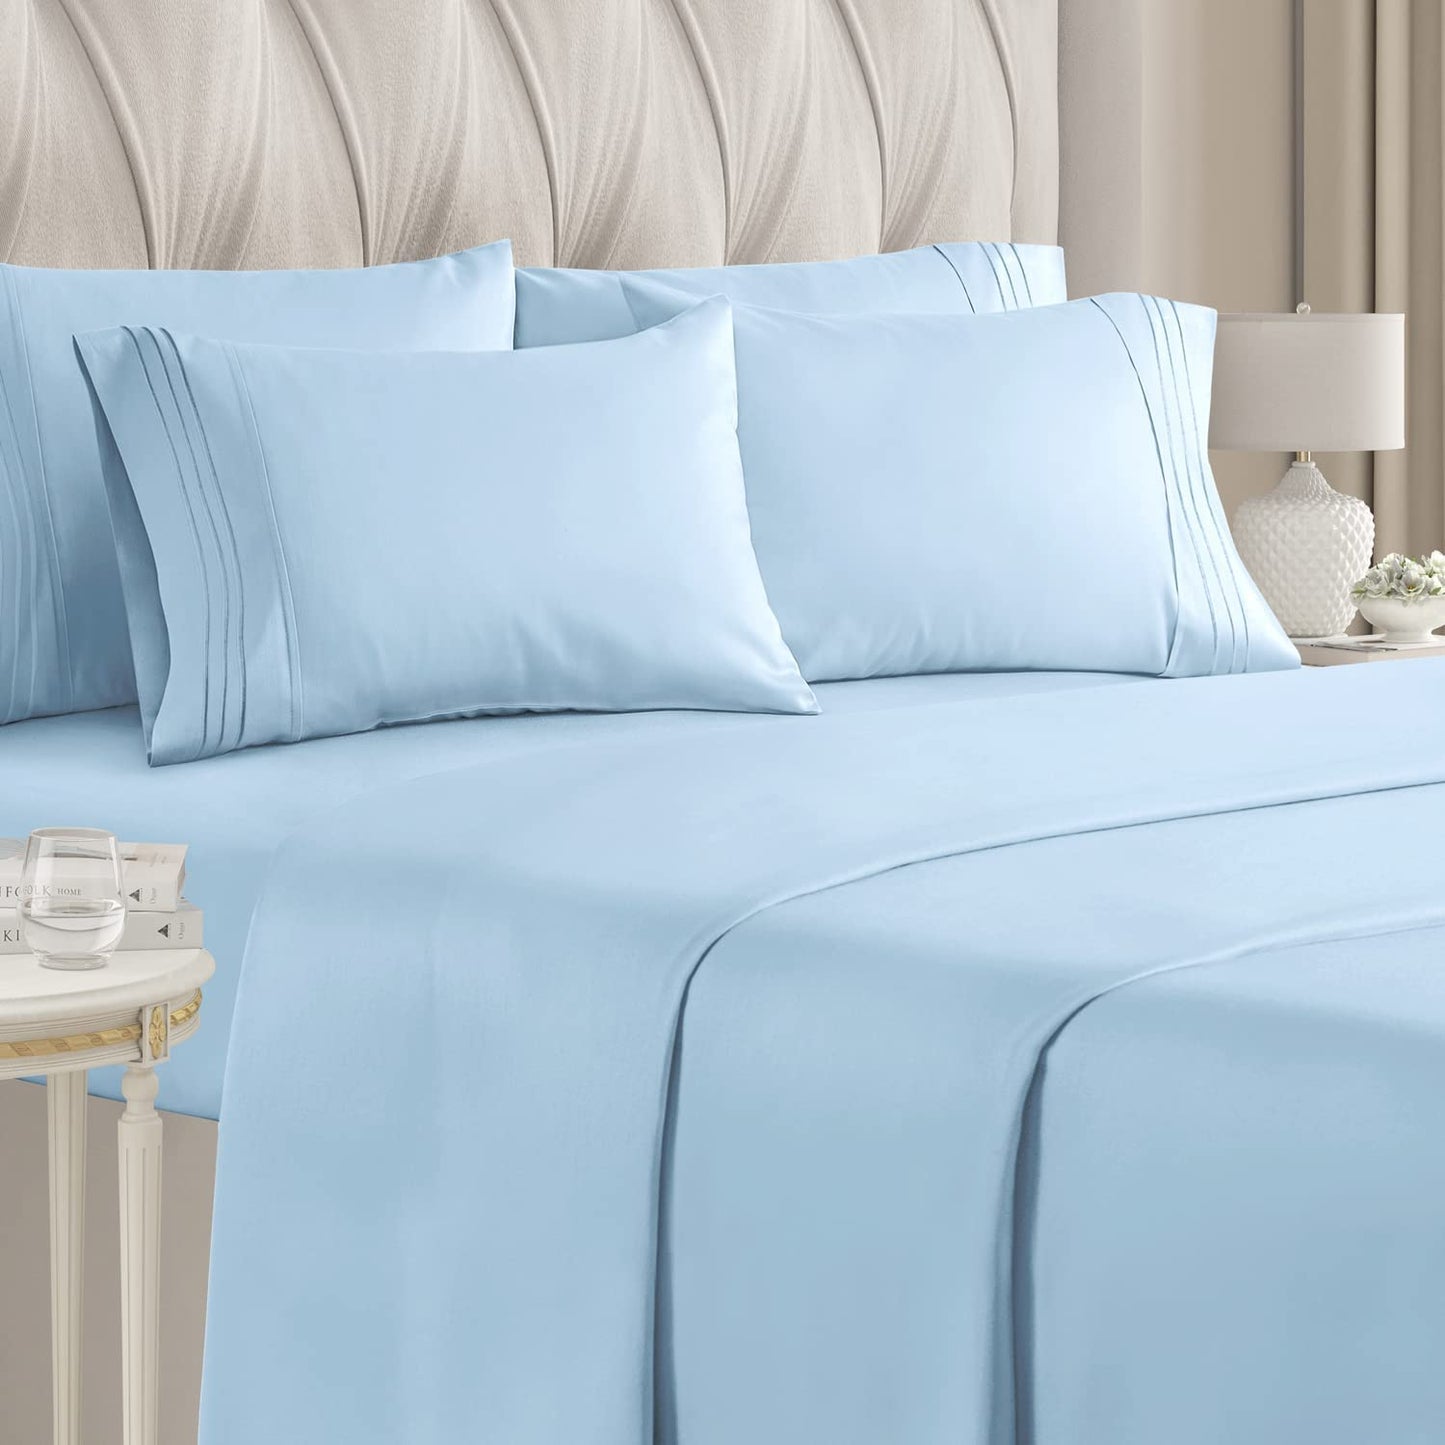 Buy Egyptian Cotton 1200 Thread Count Solid Deep Pocket Sheet Set at-Egyptianhomelinens.com Find Best Deals on Bed Sheets and Pillowcases